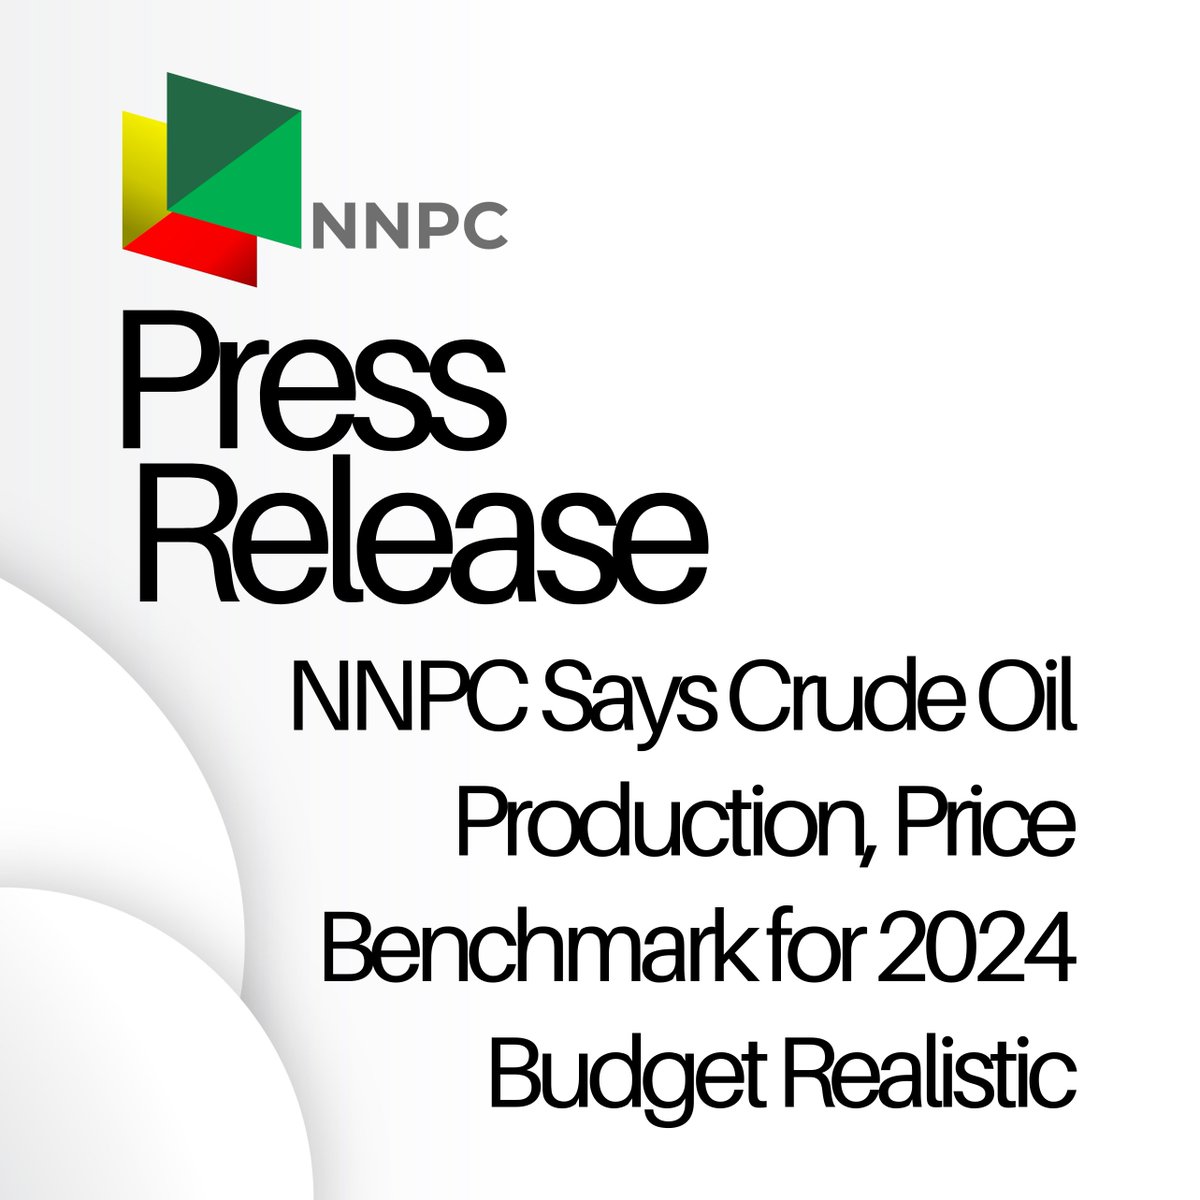 PRESS RELEASE

NNPC Says Crude Oil Production, Price Benchmark for 2024 Budget Realistic
… Pledges to Maintain Level of Dividends Projected in MTEF

The Nigerian National Petroleum Company Ltd. (NNPC Ltd.) has assured that the projections on crude oil production and price